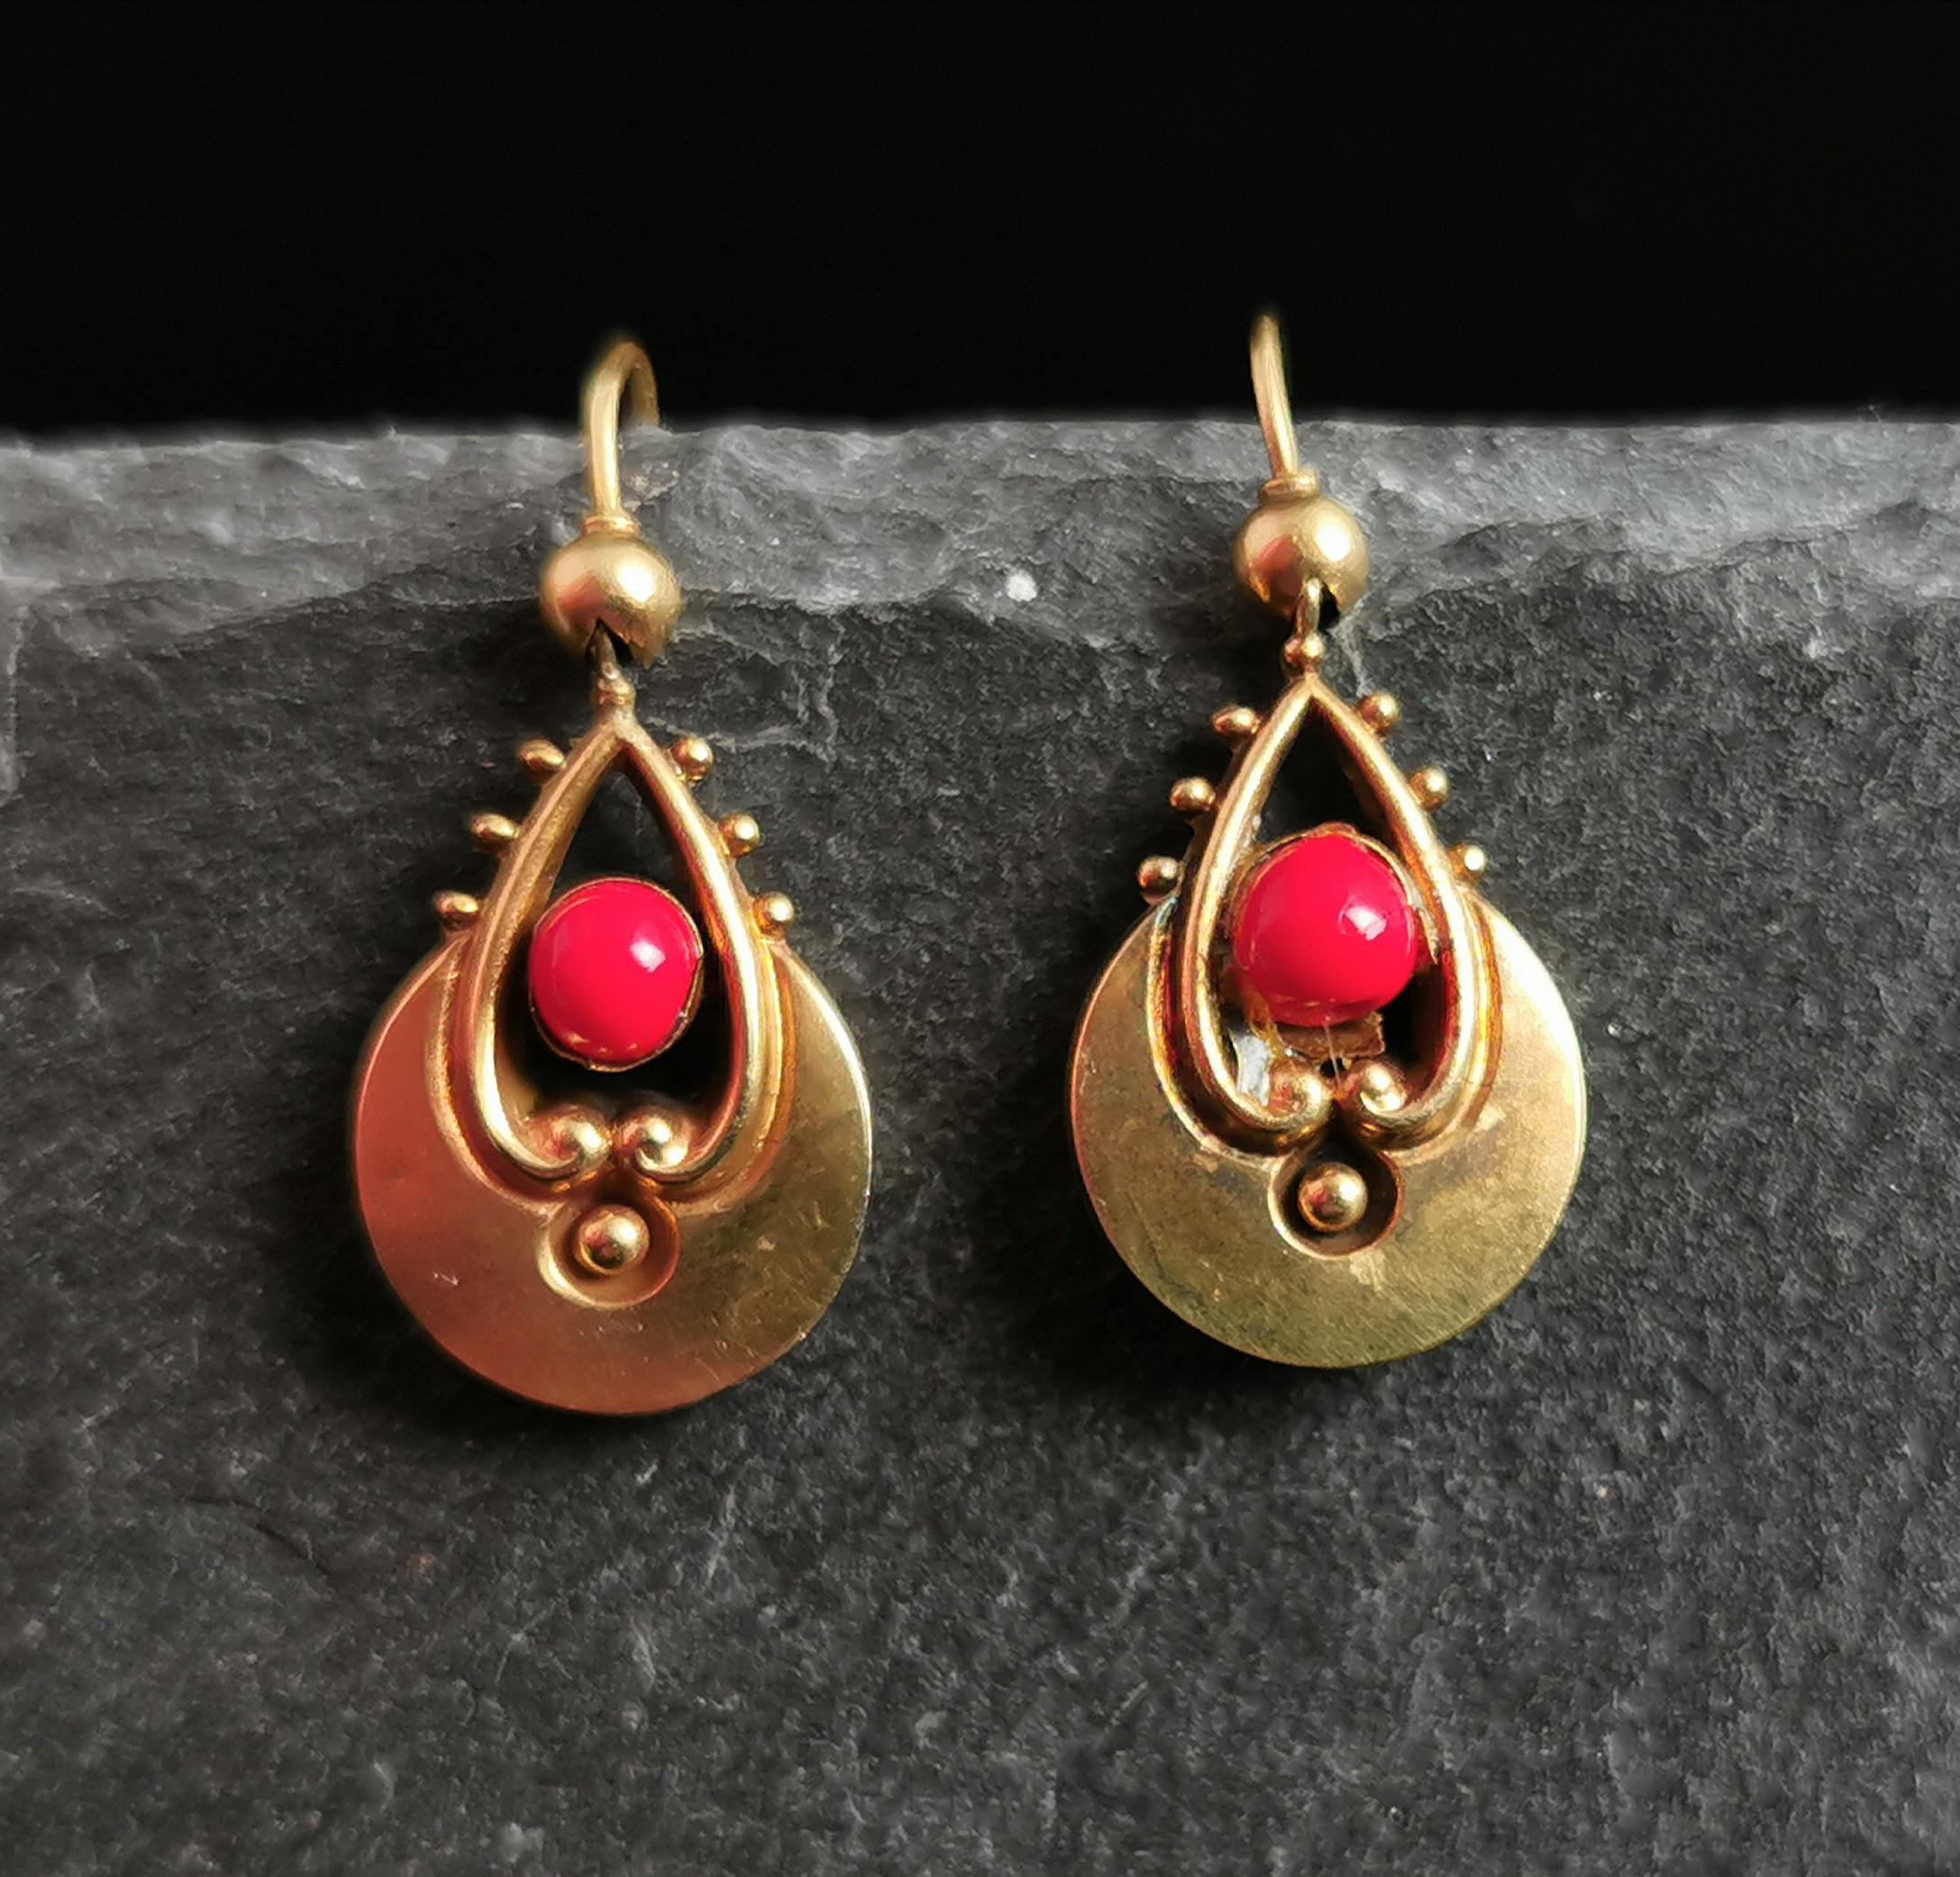 A beautiful pair of Antique 15ct yellow gold dangly earrings.

Etruscan revival style gold drops with scroll work and beaded detailing.

They have been set with a coral coloured paste bead on each side, these are not original but were added a long